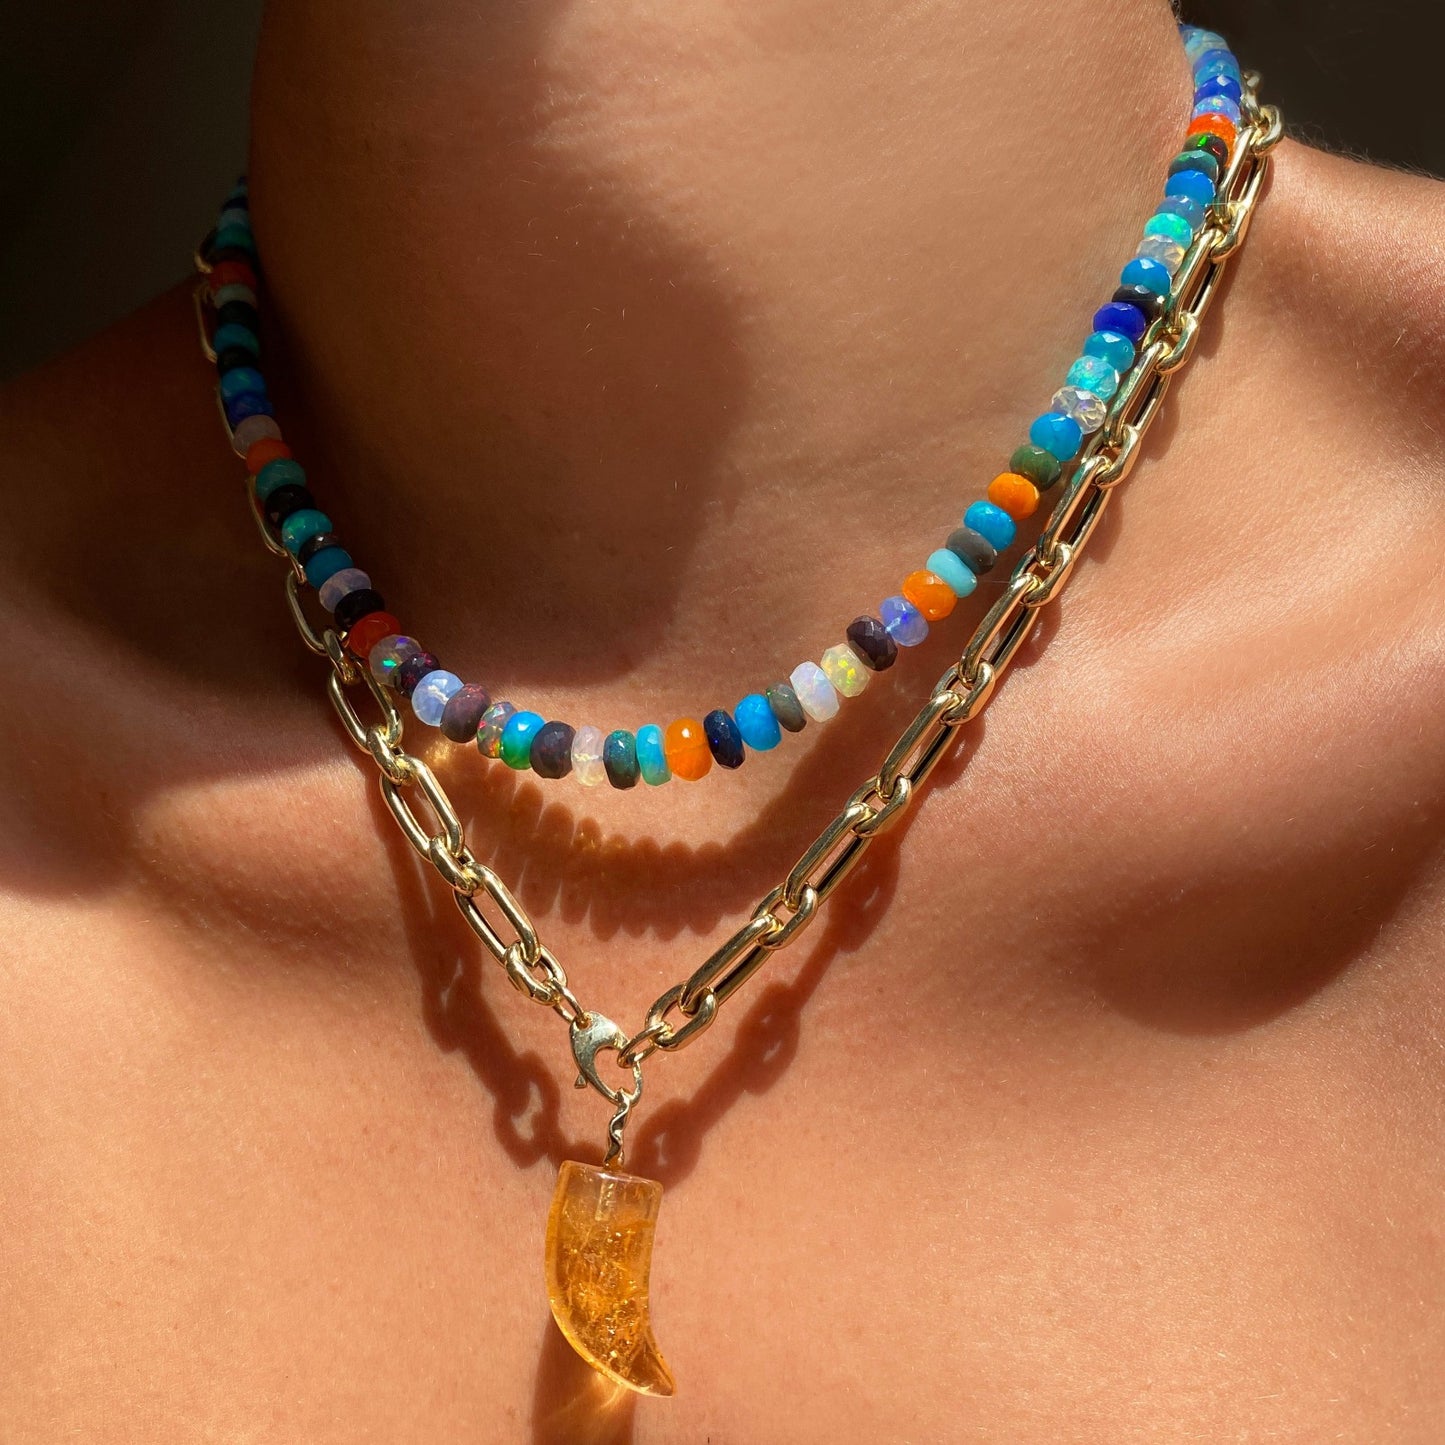 Shimmering beaded necklace made of faceted opals in shades of fiery blues, greens, teal, black, orange, and clear on a gold linking ovals clasp. Styled on a neck layered with a diamond cut link chain necklace and horn charm.